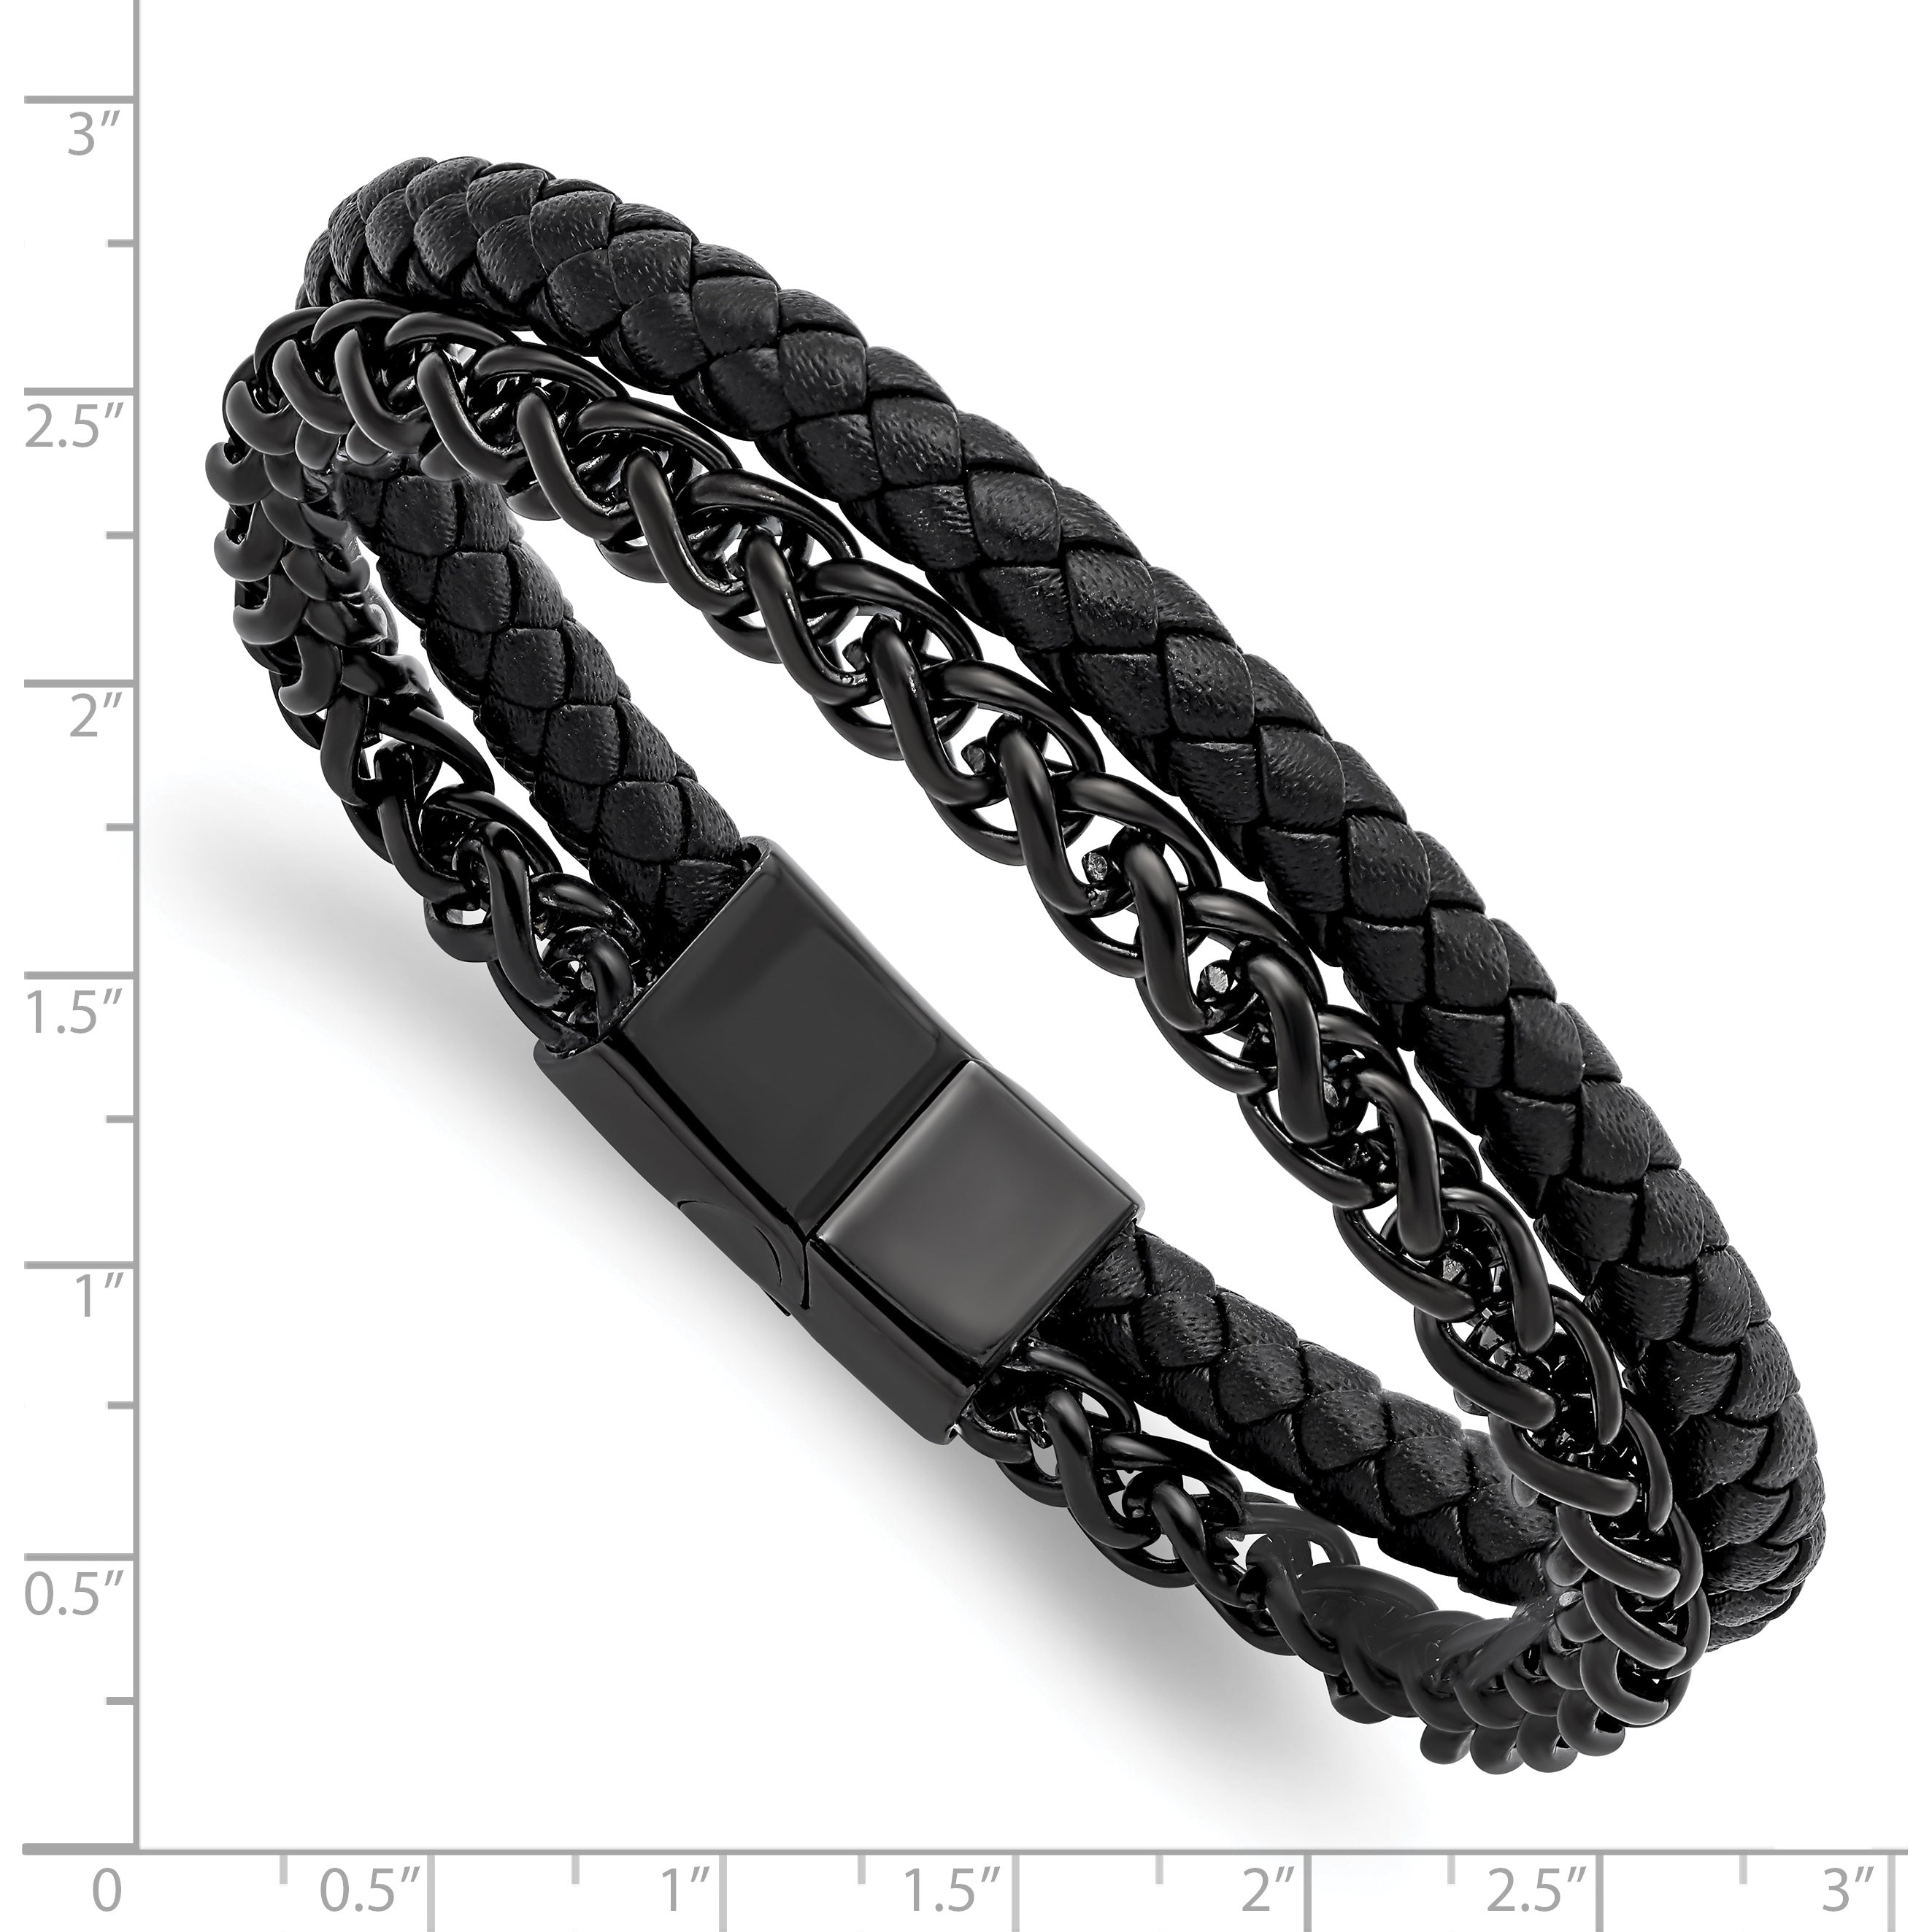 Chisel Stainless Steel Polished Black IP-plated Chain and Black Leather 8.5 inch Bracelet